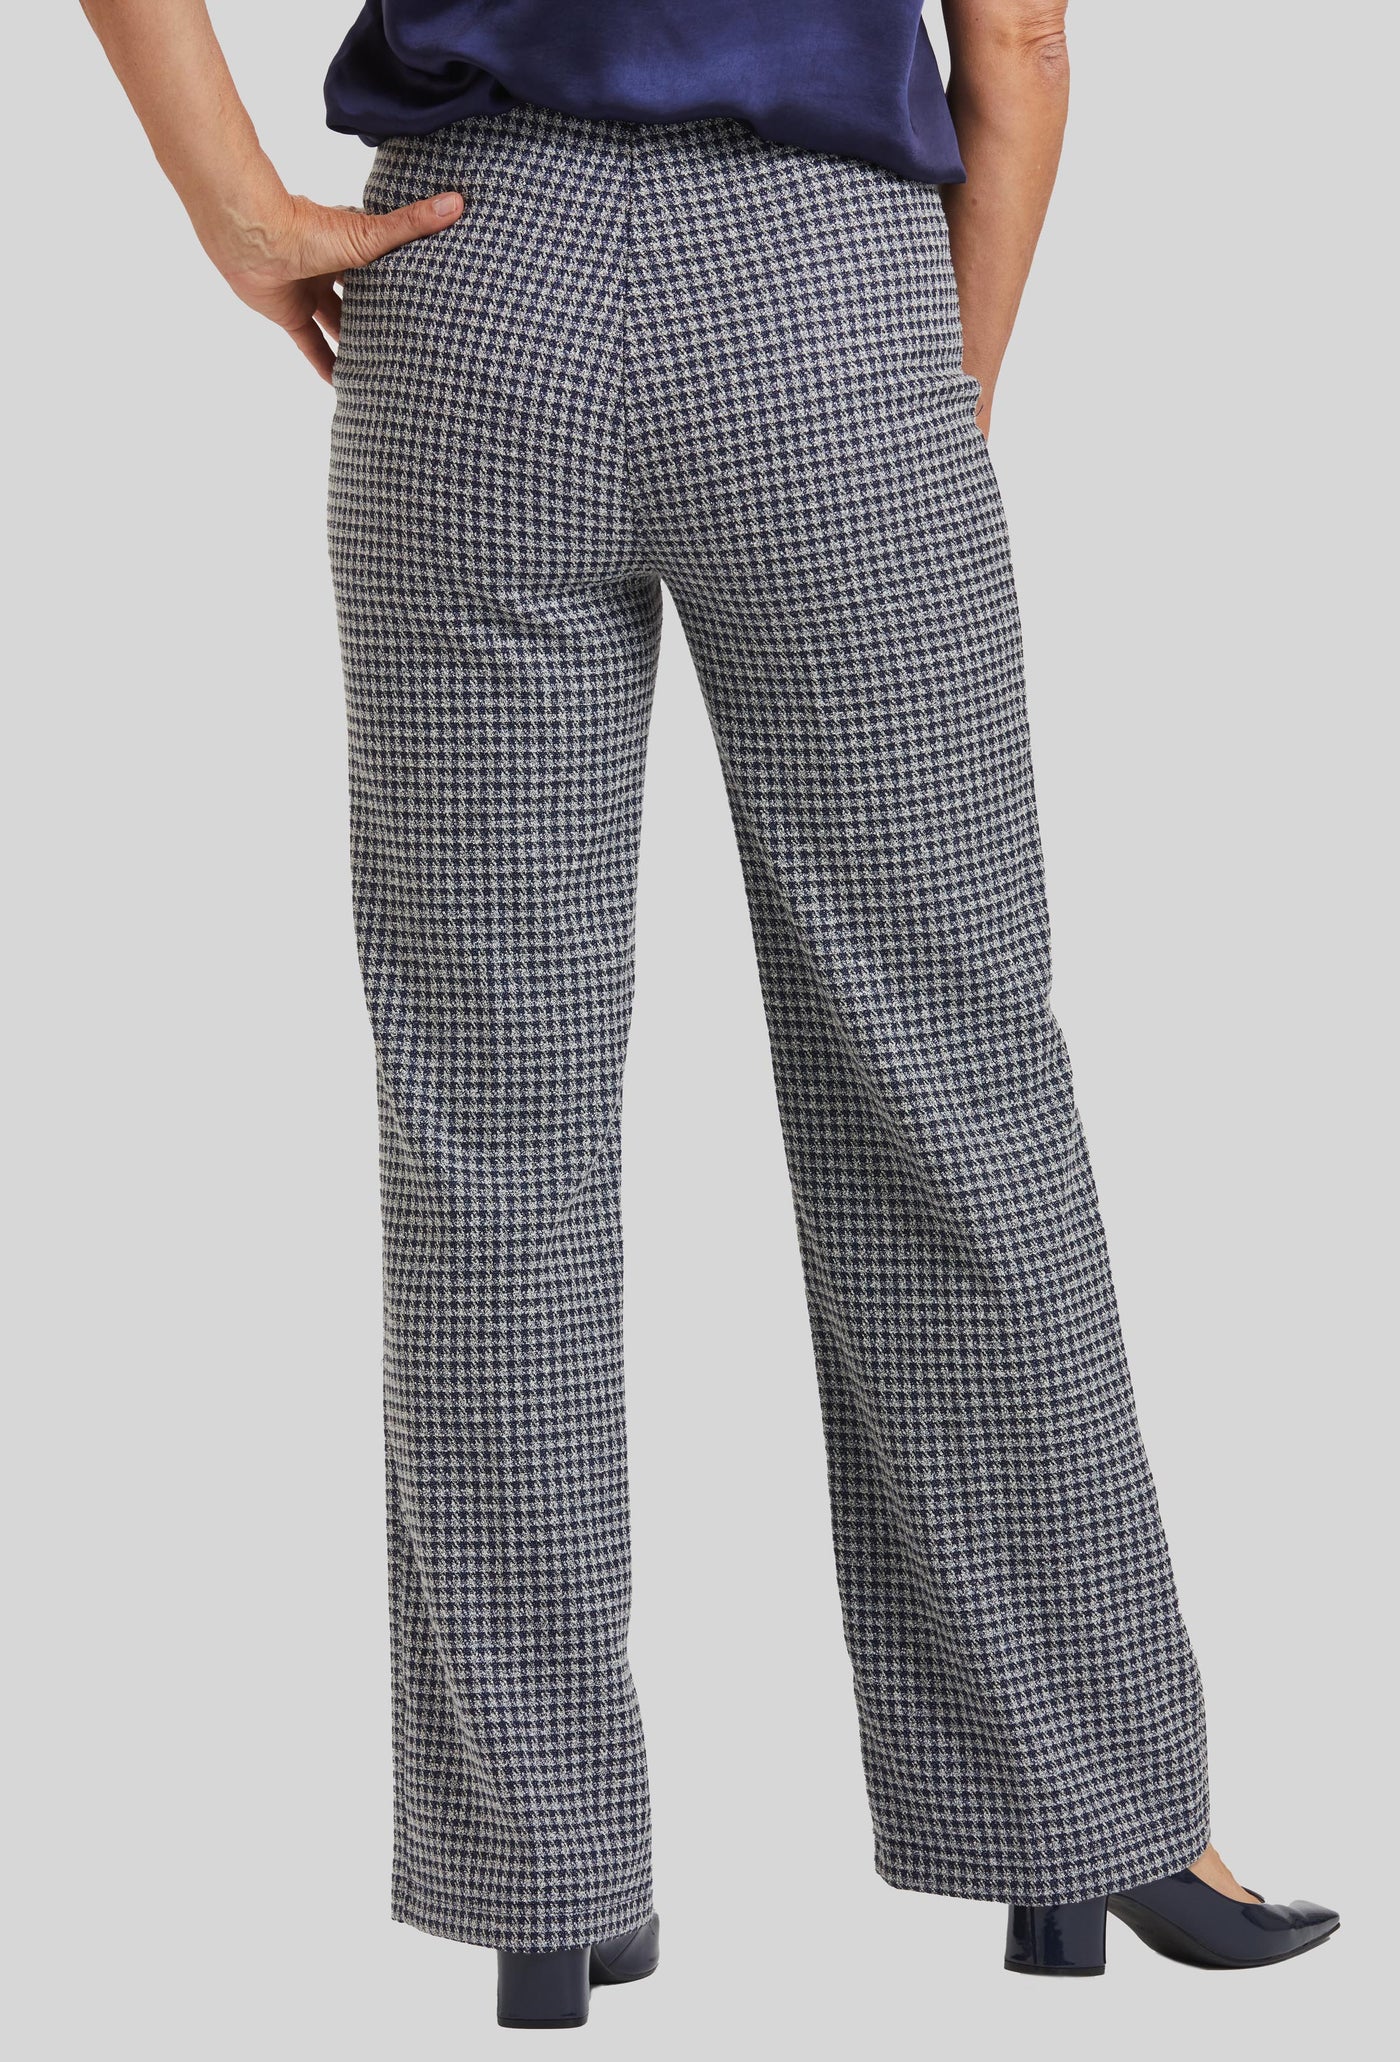 Jules Clean Pull On Pant - Brussels Metallic Check- FINAL SALE